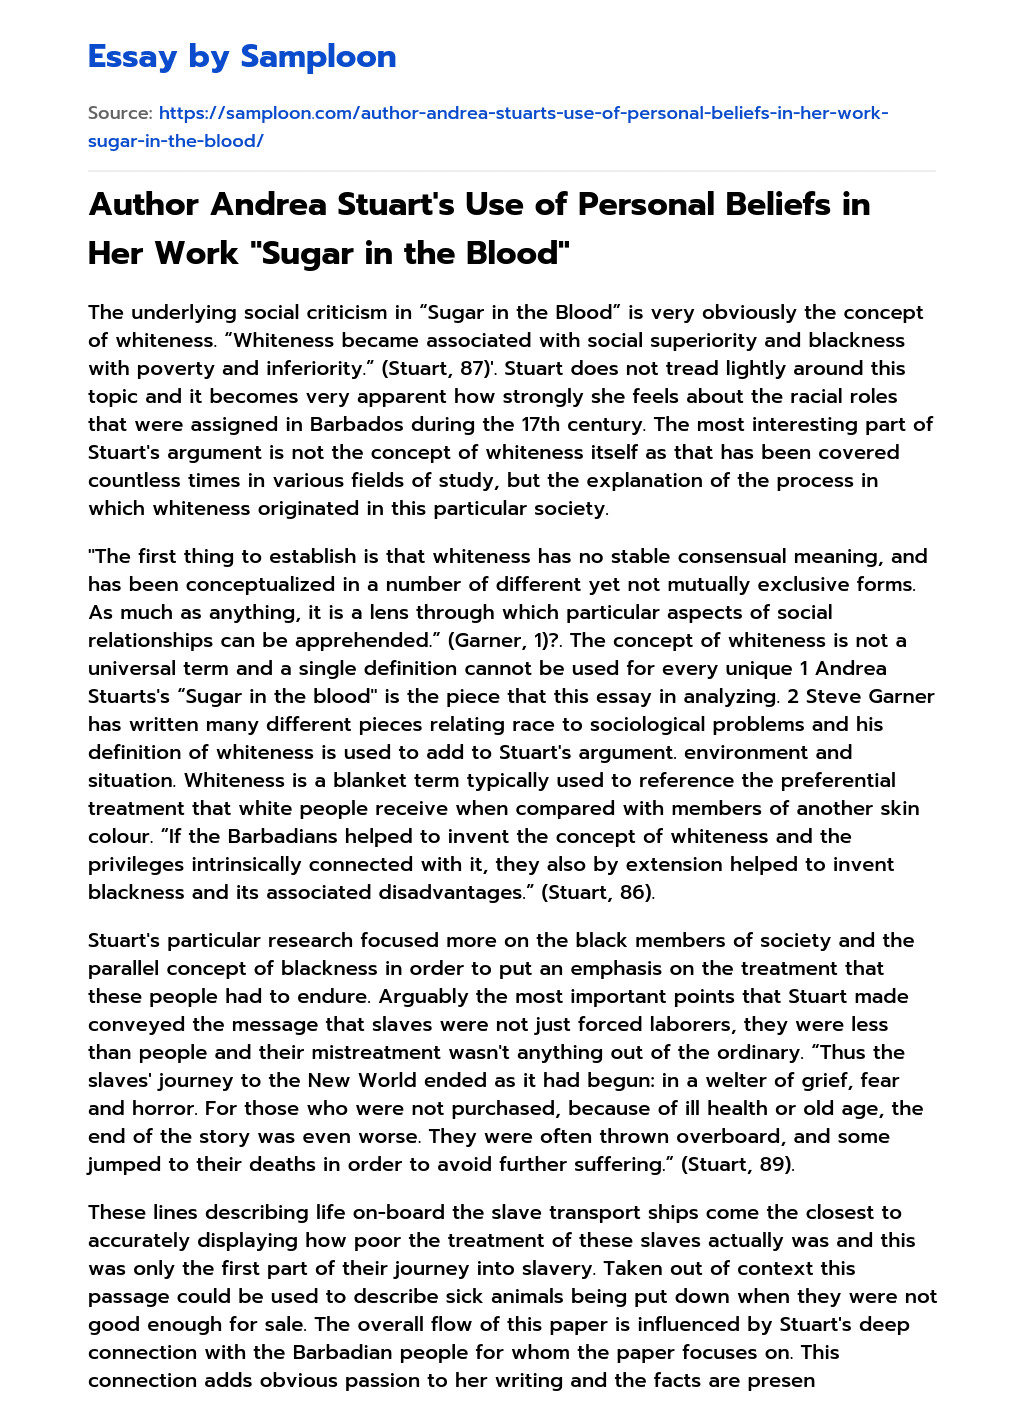 Author Andrea Stuart’s Use of Personal Beliefs in Her Work “Sugar in the Blood” essay